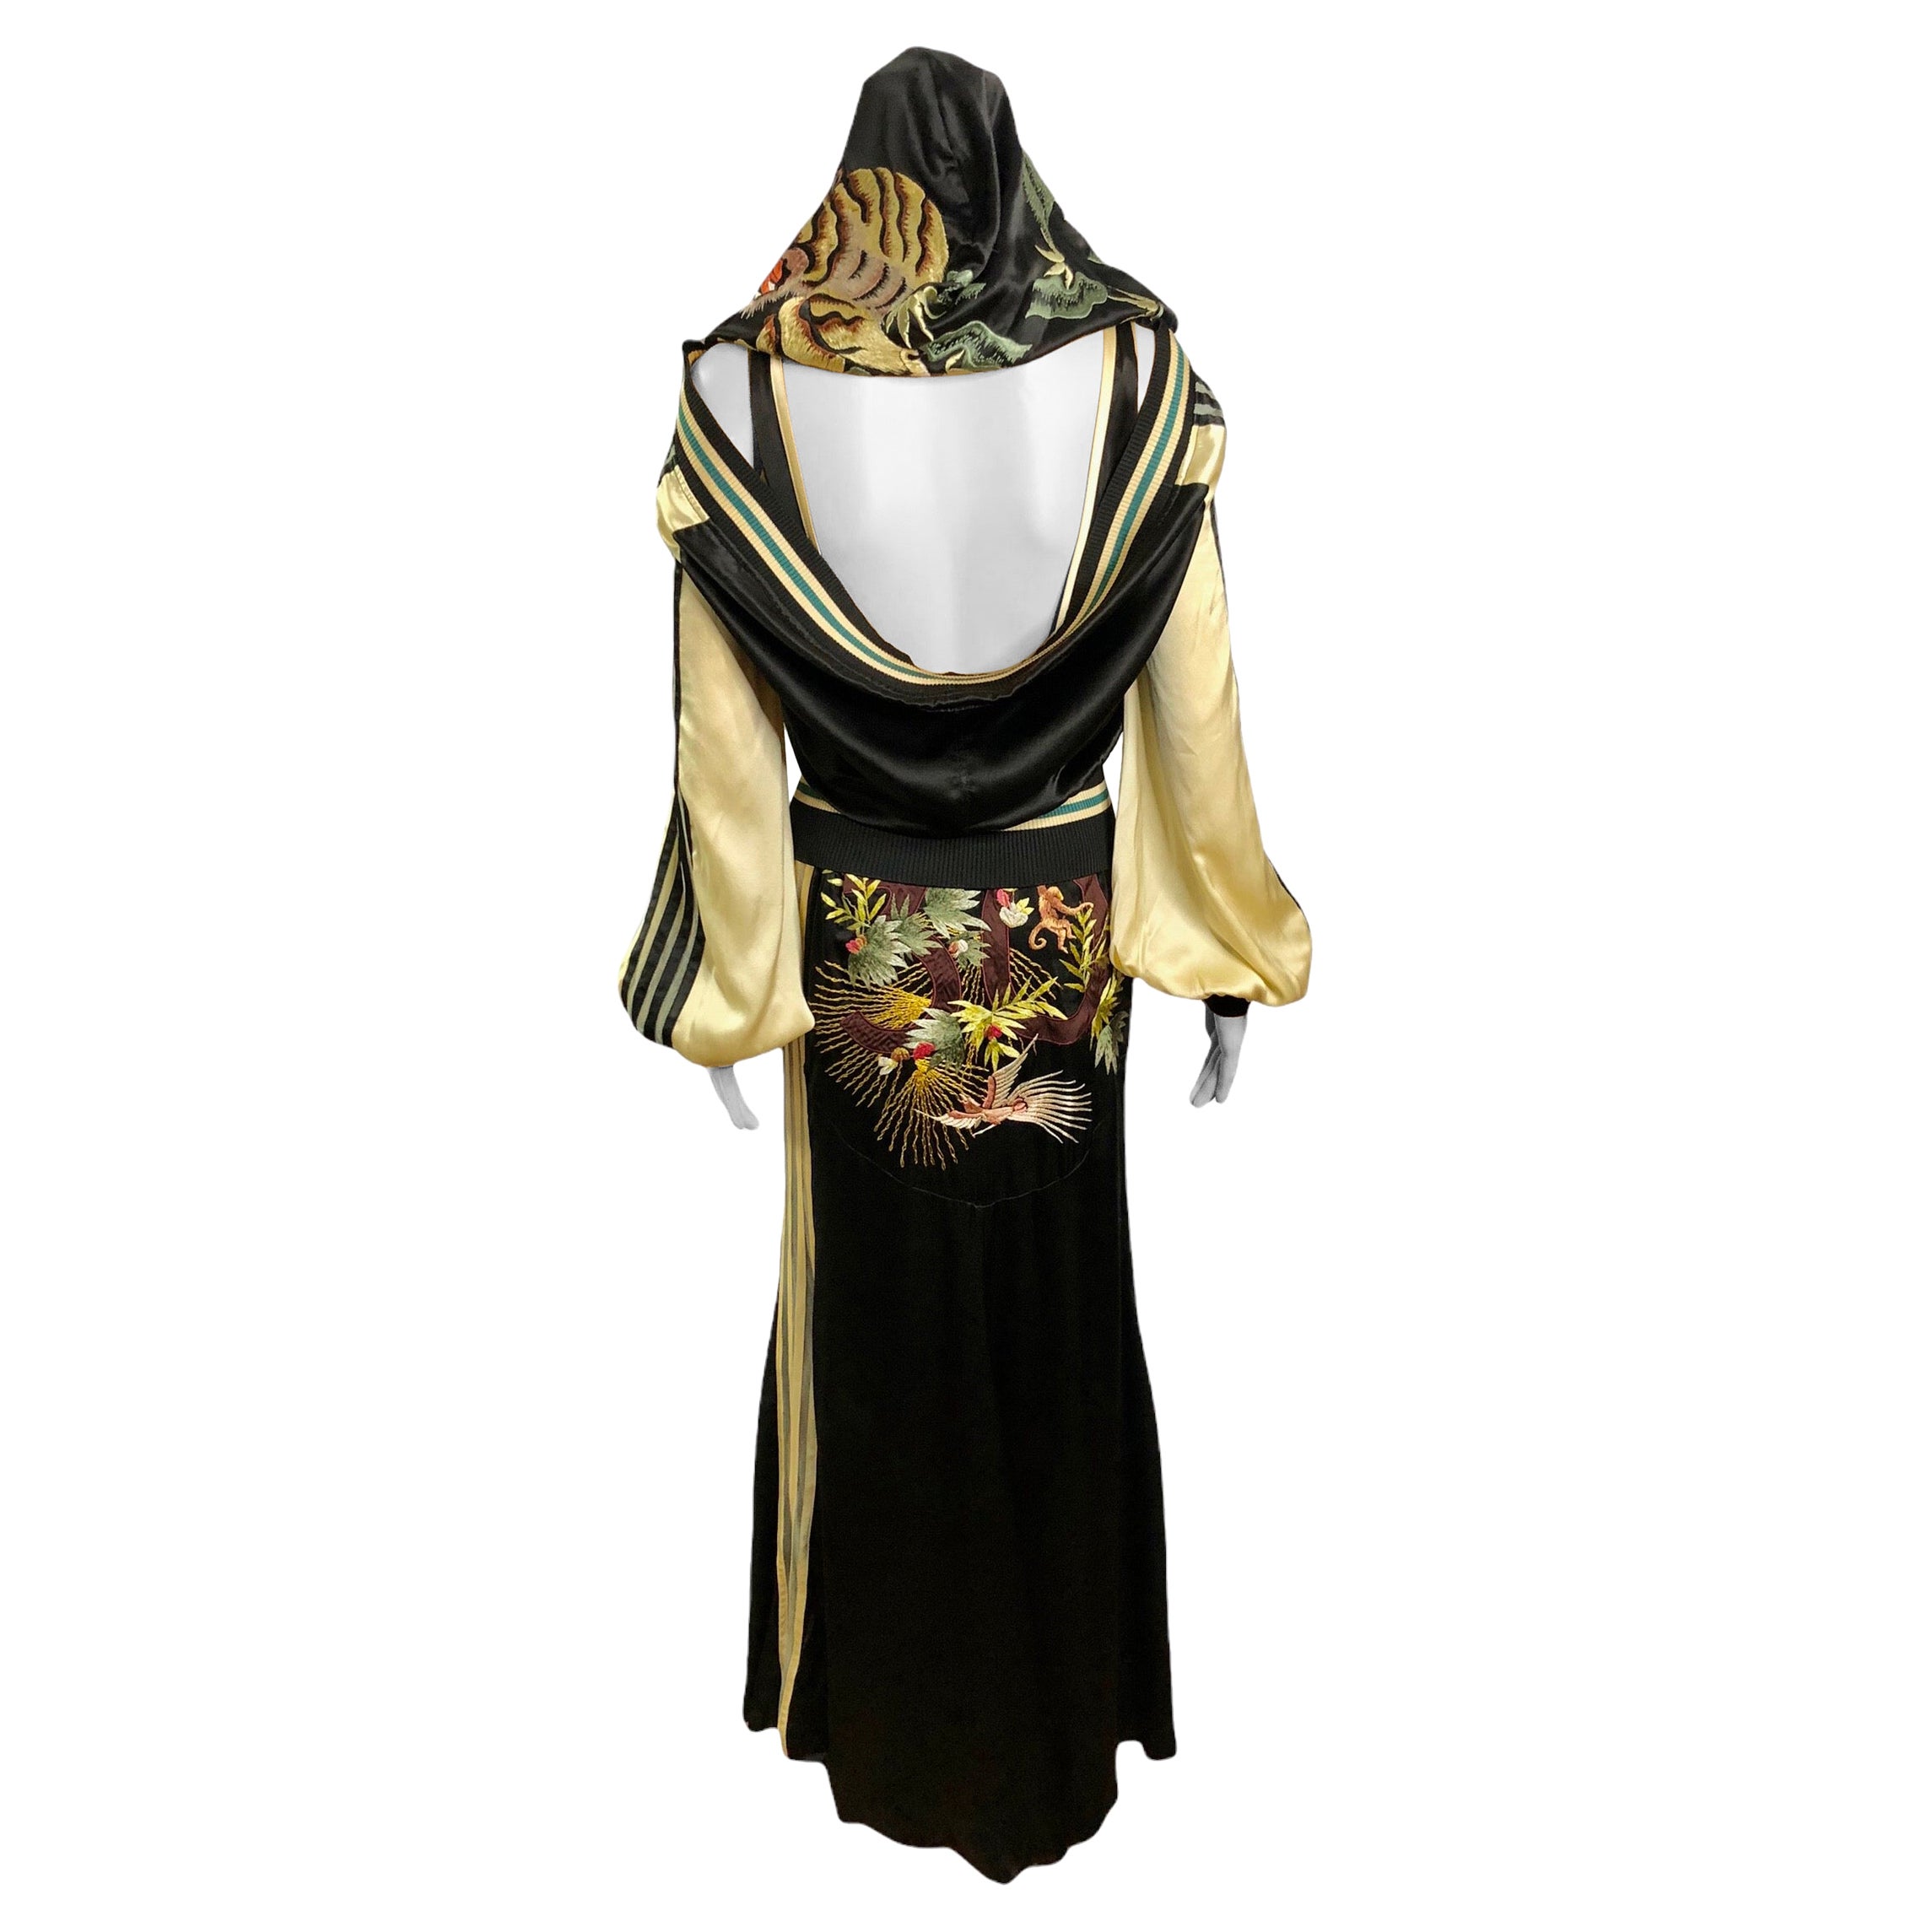 Jean Paul Gaultier S/S 2007 Runway Embroidered Silk Dress & Jacket 2 Piece Set  For Sale